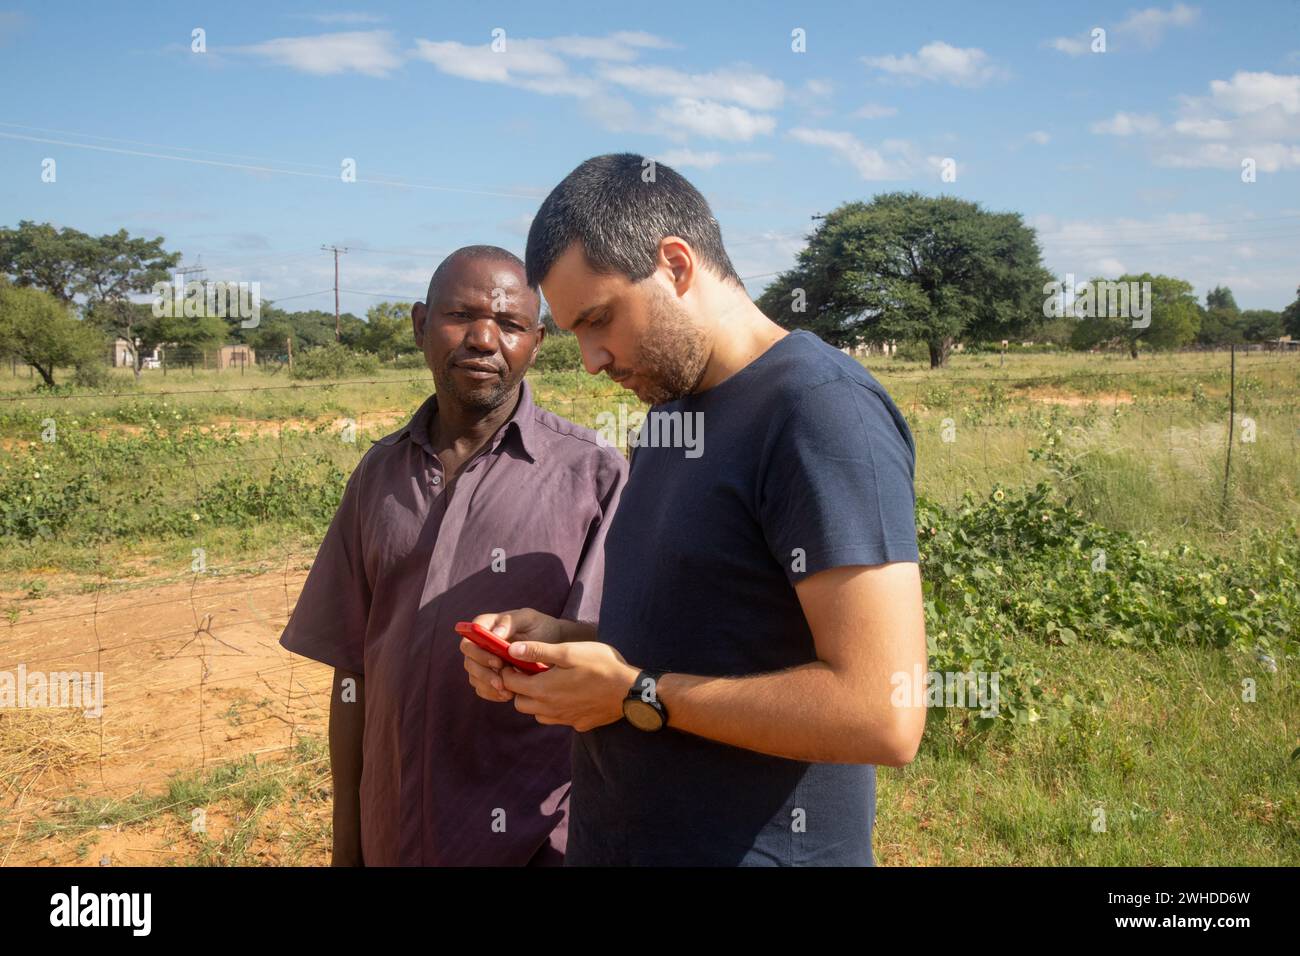 african village, old entrepreneur man together with a ngo social worker using a phone learning new skills for a small business Stock Photo